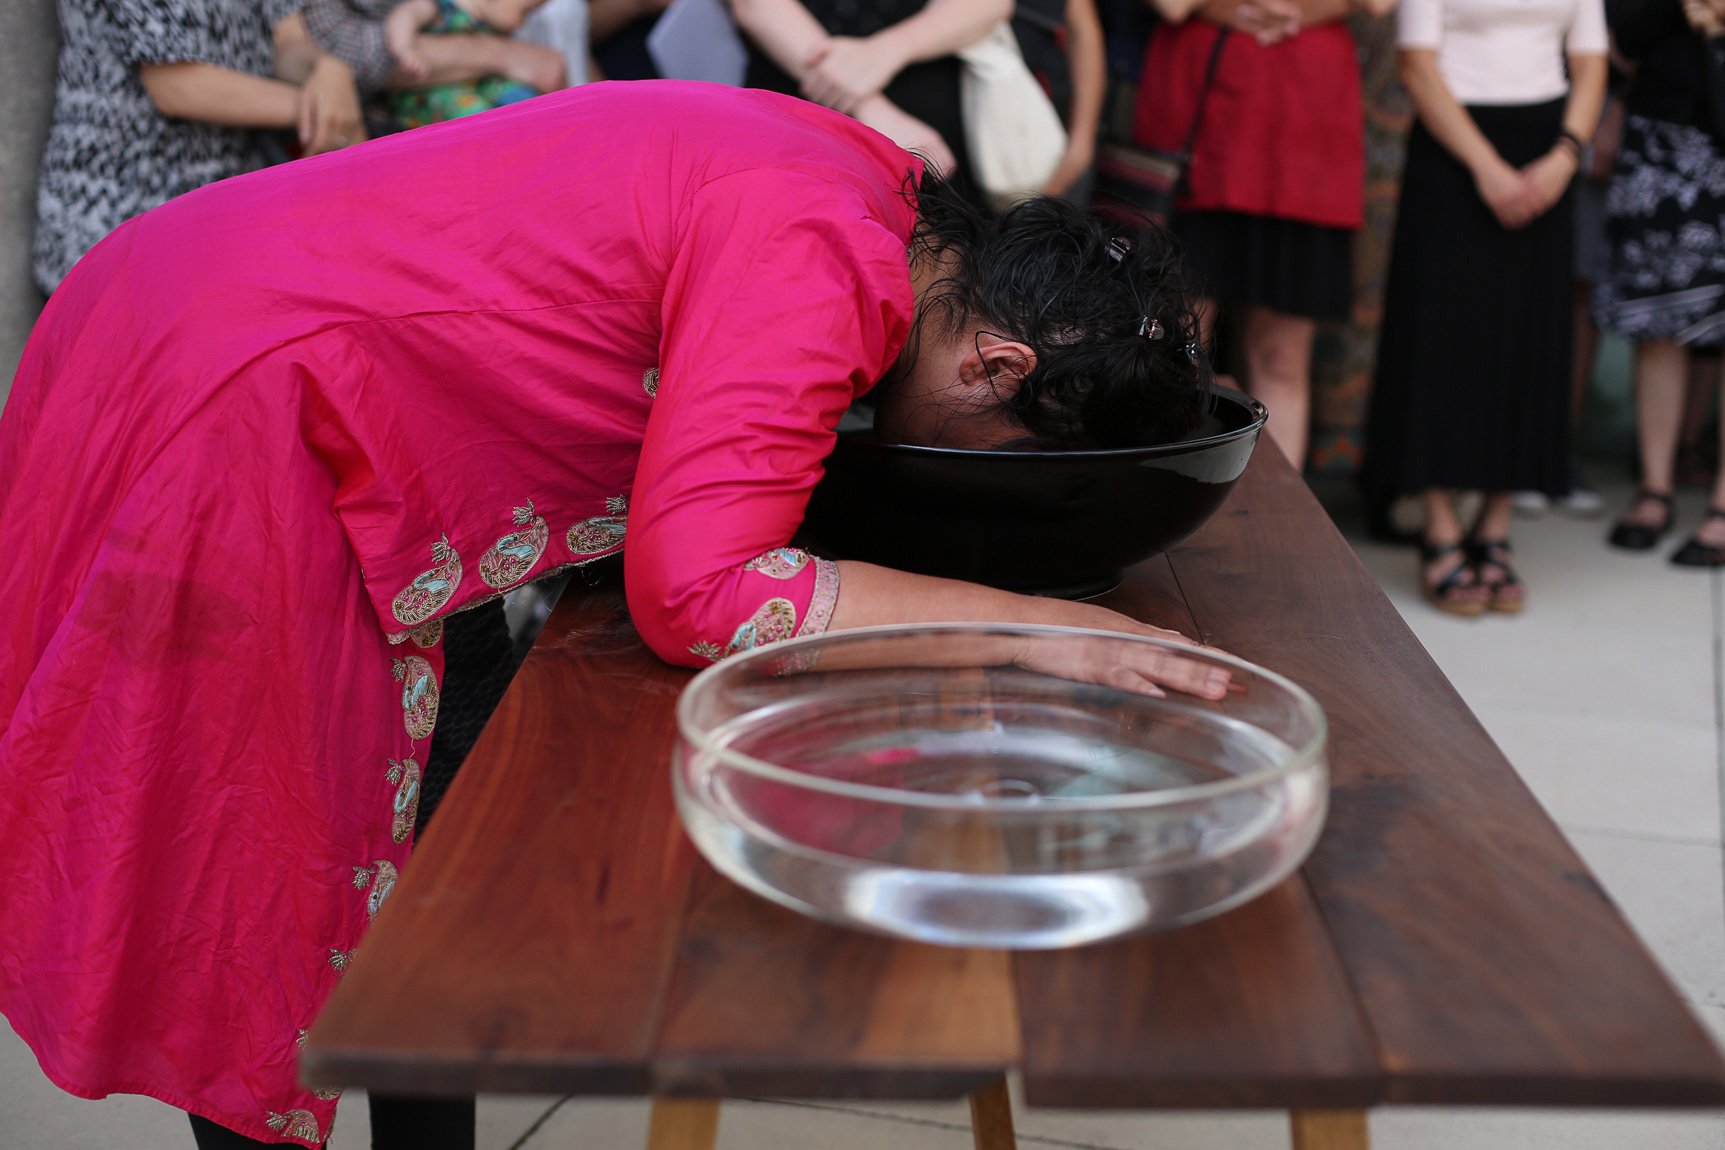 Bhanu Kapil brings her face down to dip into a bowl of water for an audience.